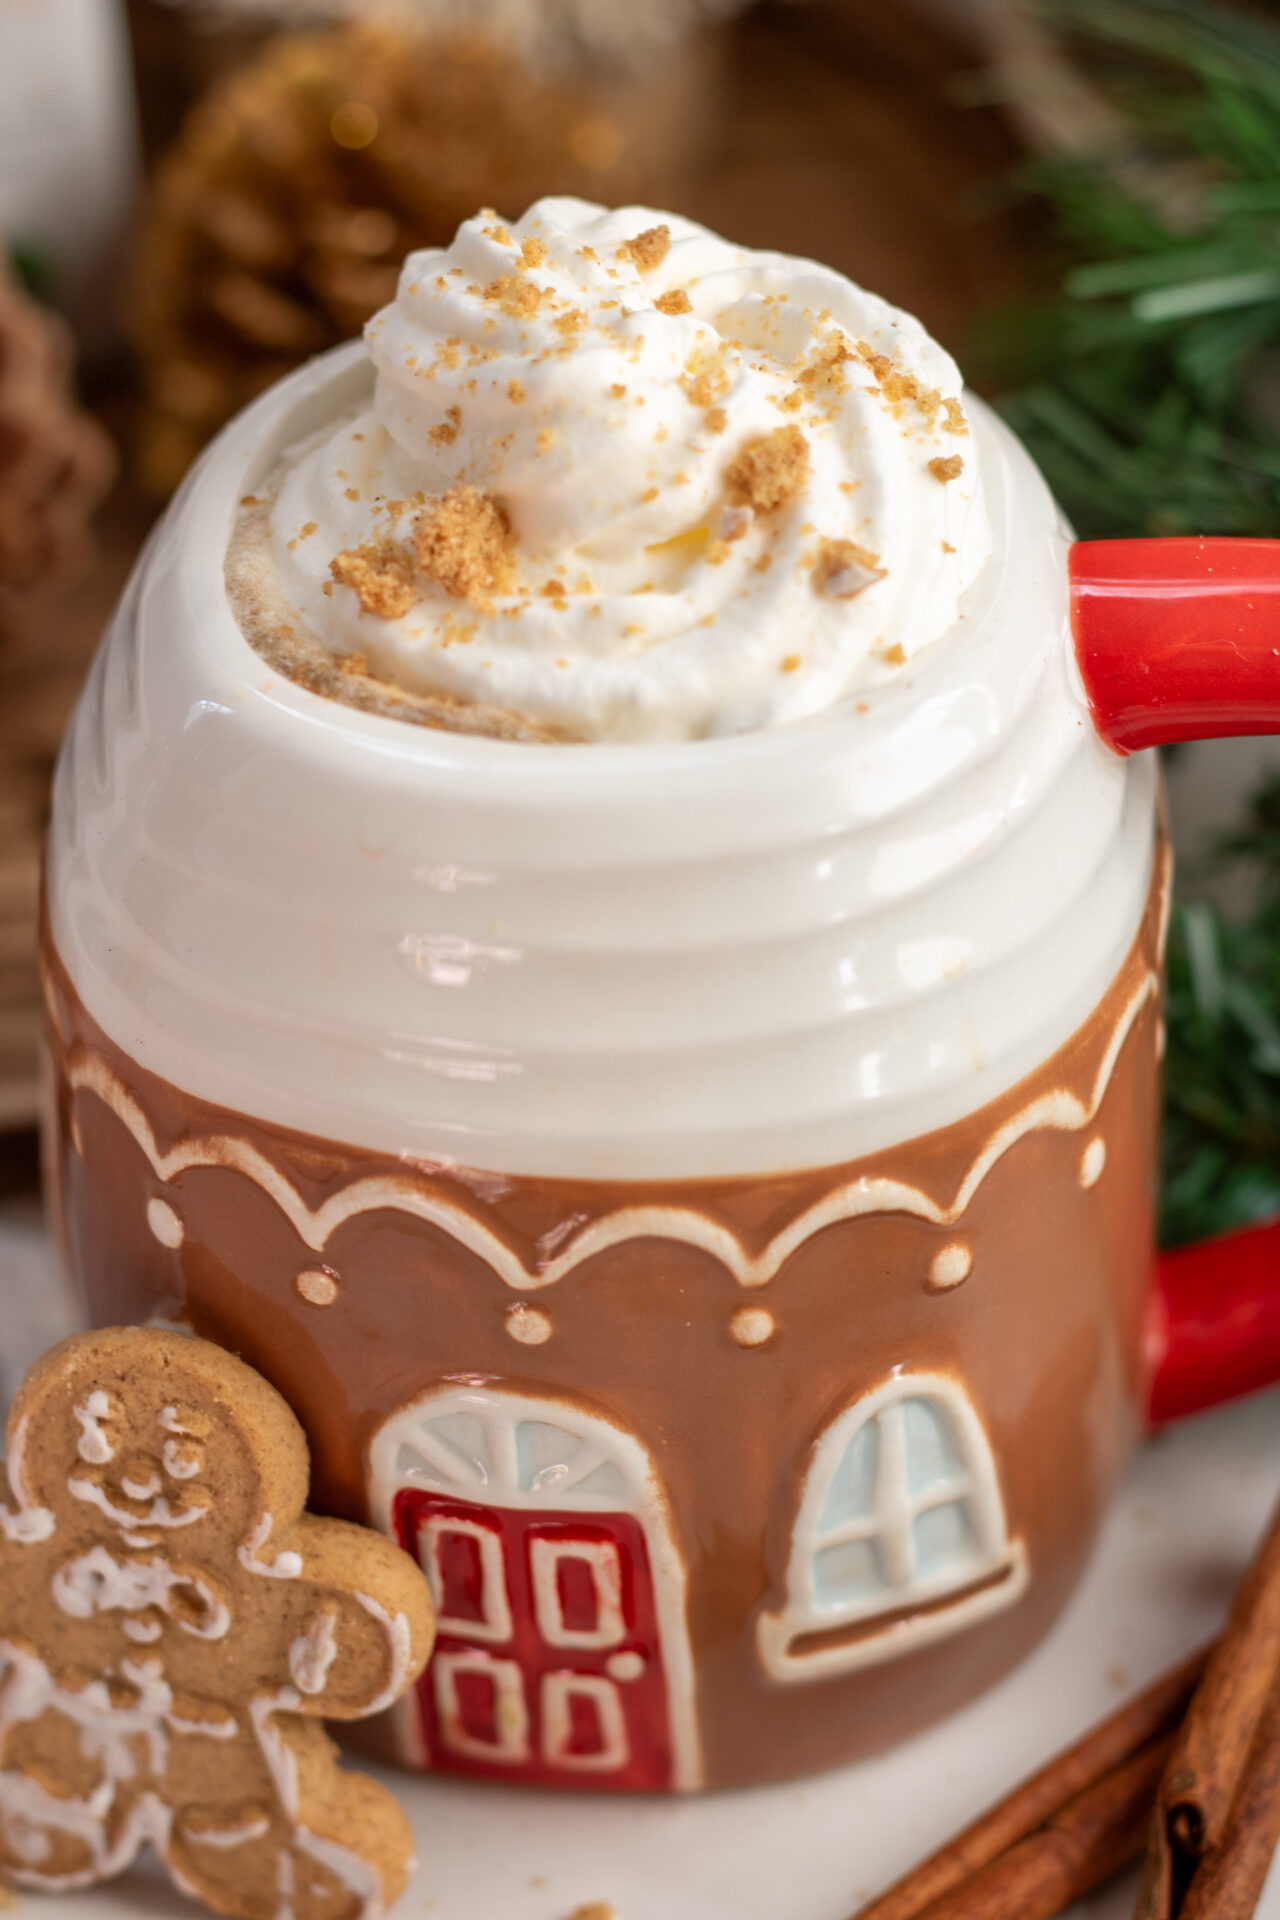 A gingerbread house coffee mug with gingerbread chai latte. It's topped with whipped cream and gingerbread cookie pieces. there's a gingerbread man cookie next to the cup and pinecones in the background